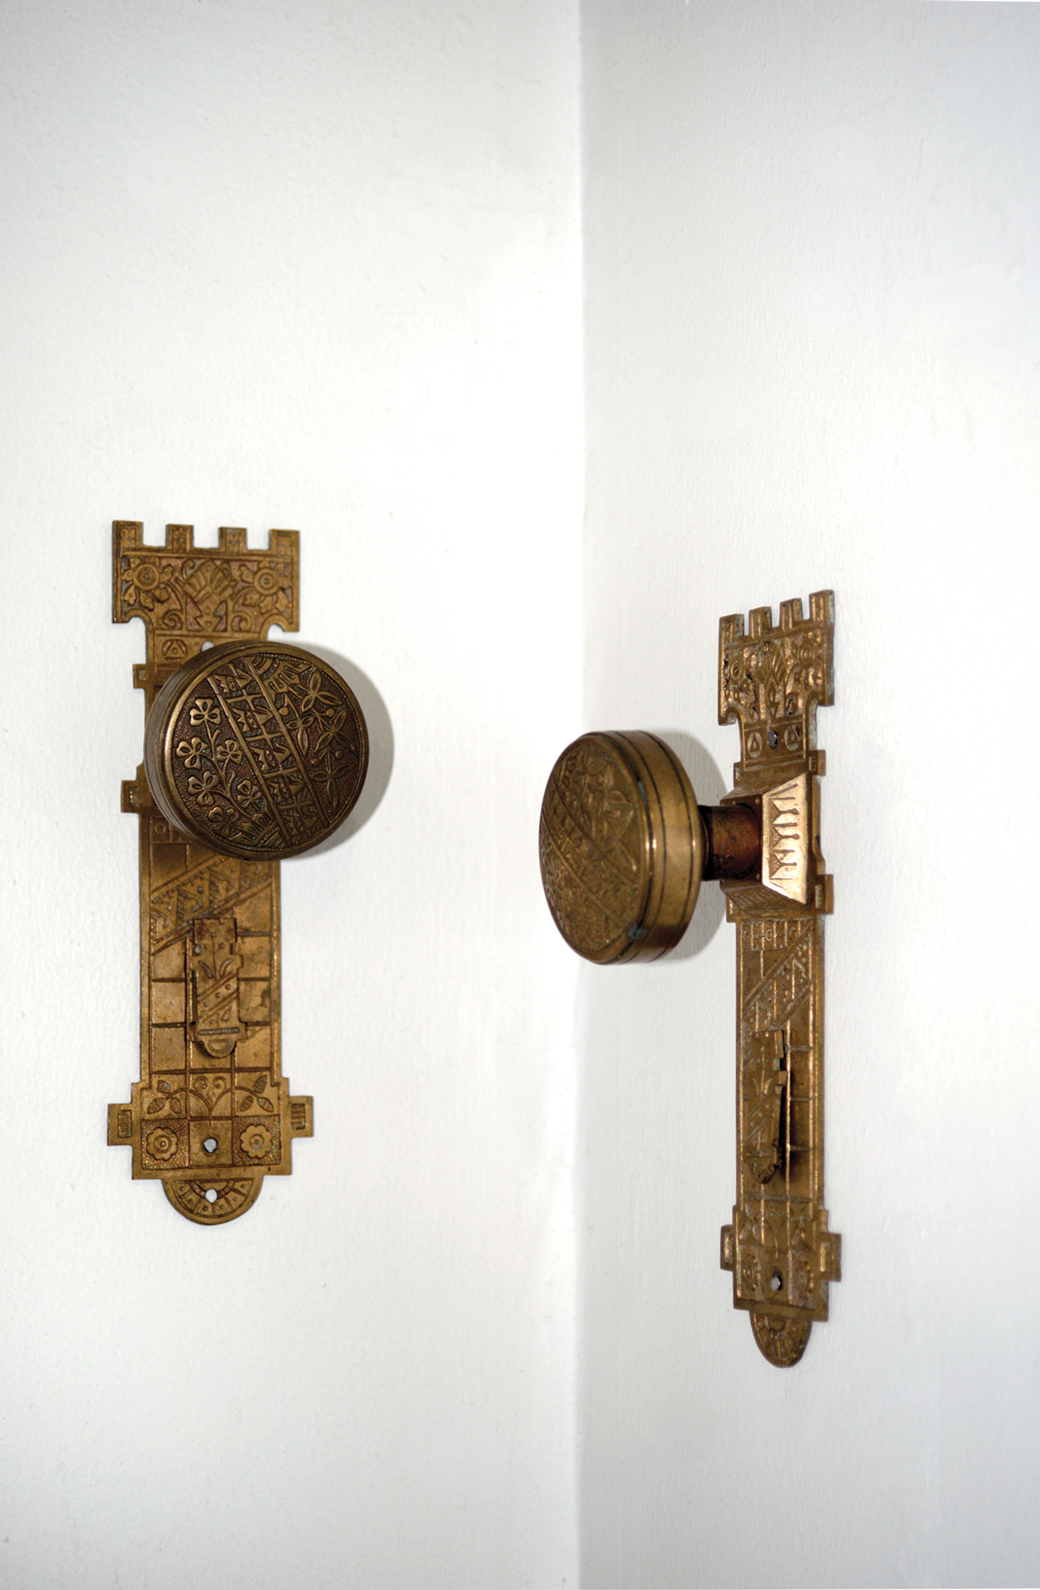 Where From Here, 2016. Brass, 10” x 3” x 2”. *All images Courtesy CUE Art Foundation, New York. © Kambui Olujimi.